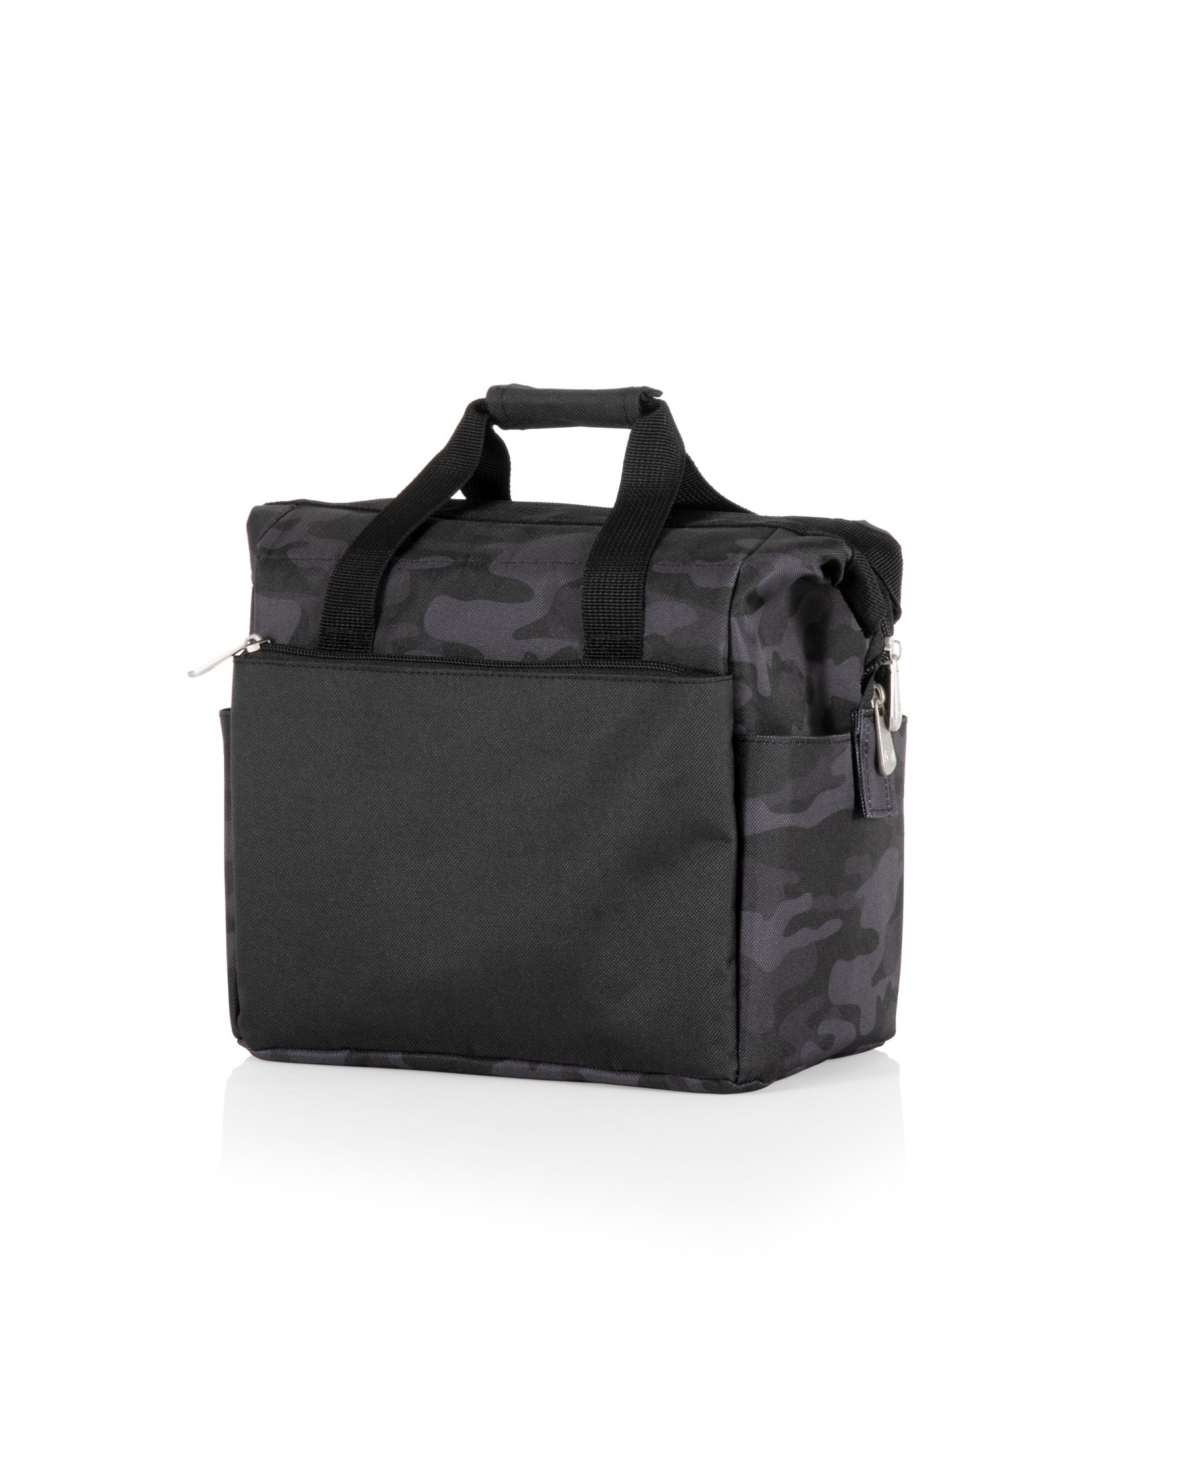 Oniva On The Go Lunch Cooler Bag In Black Camo